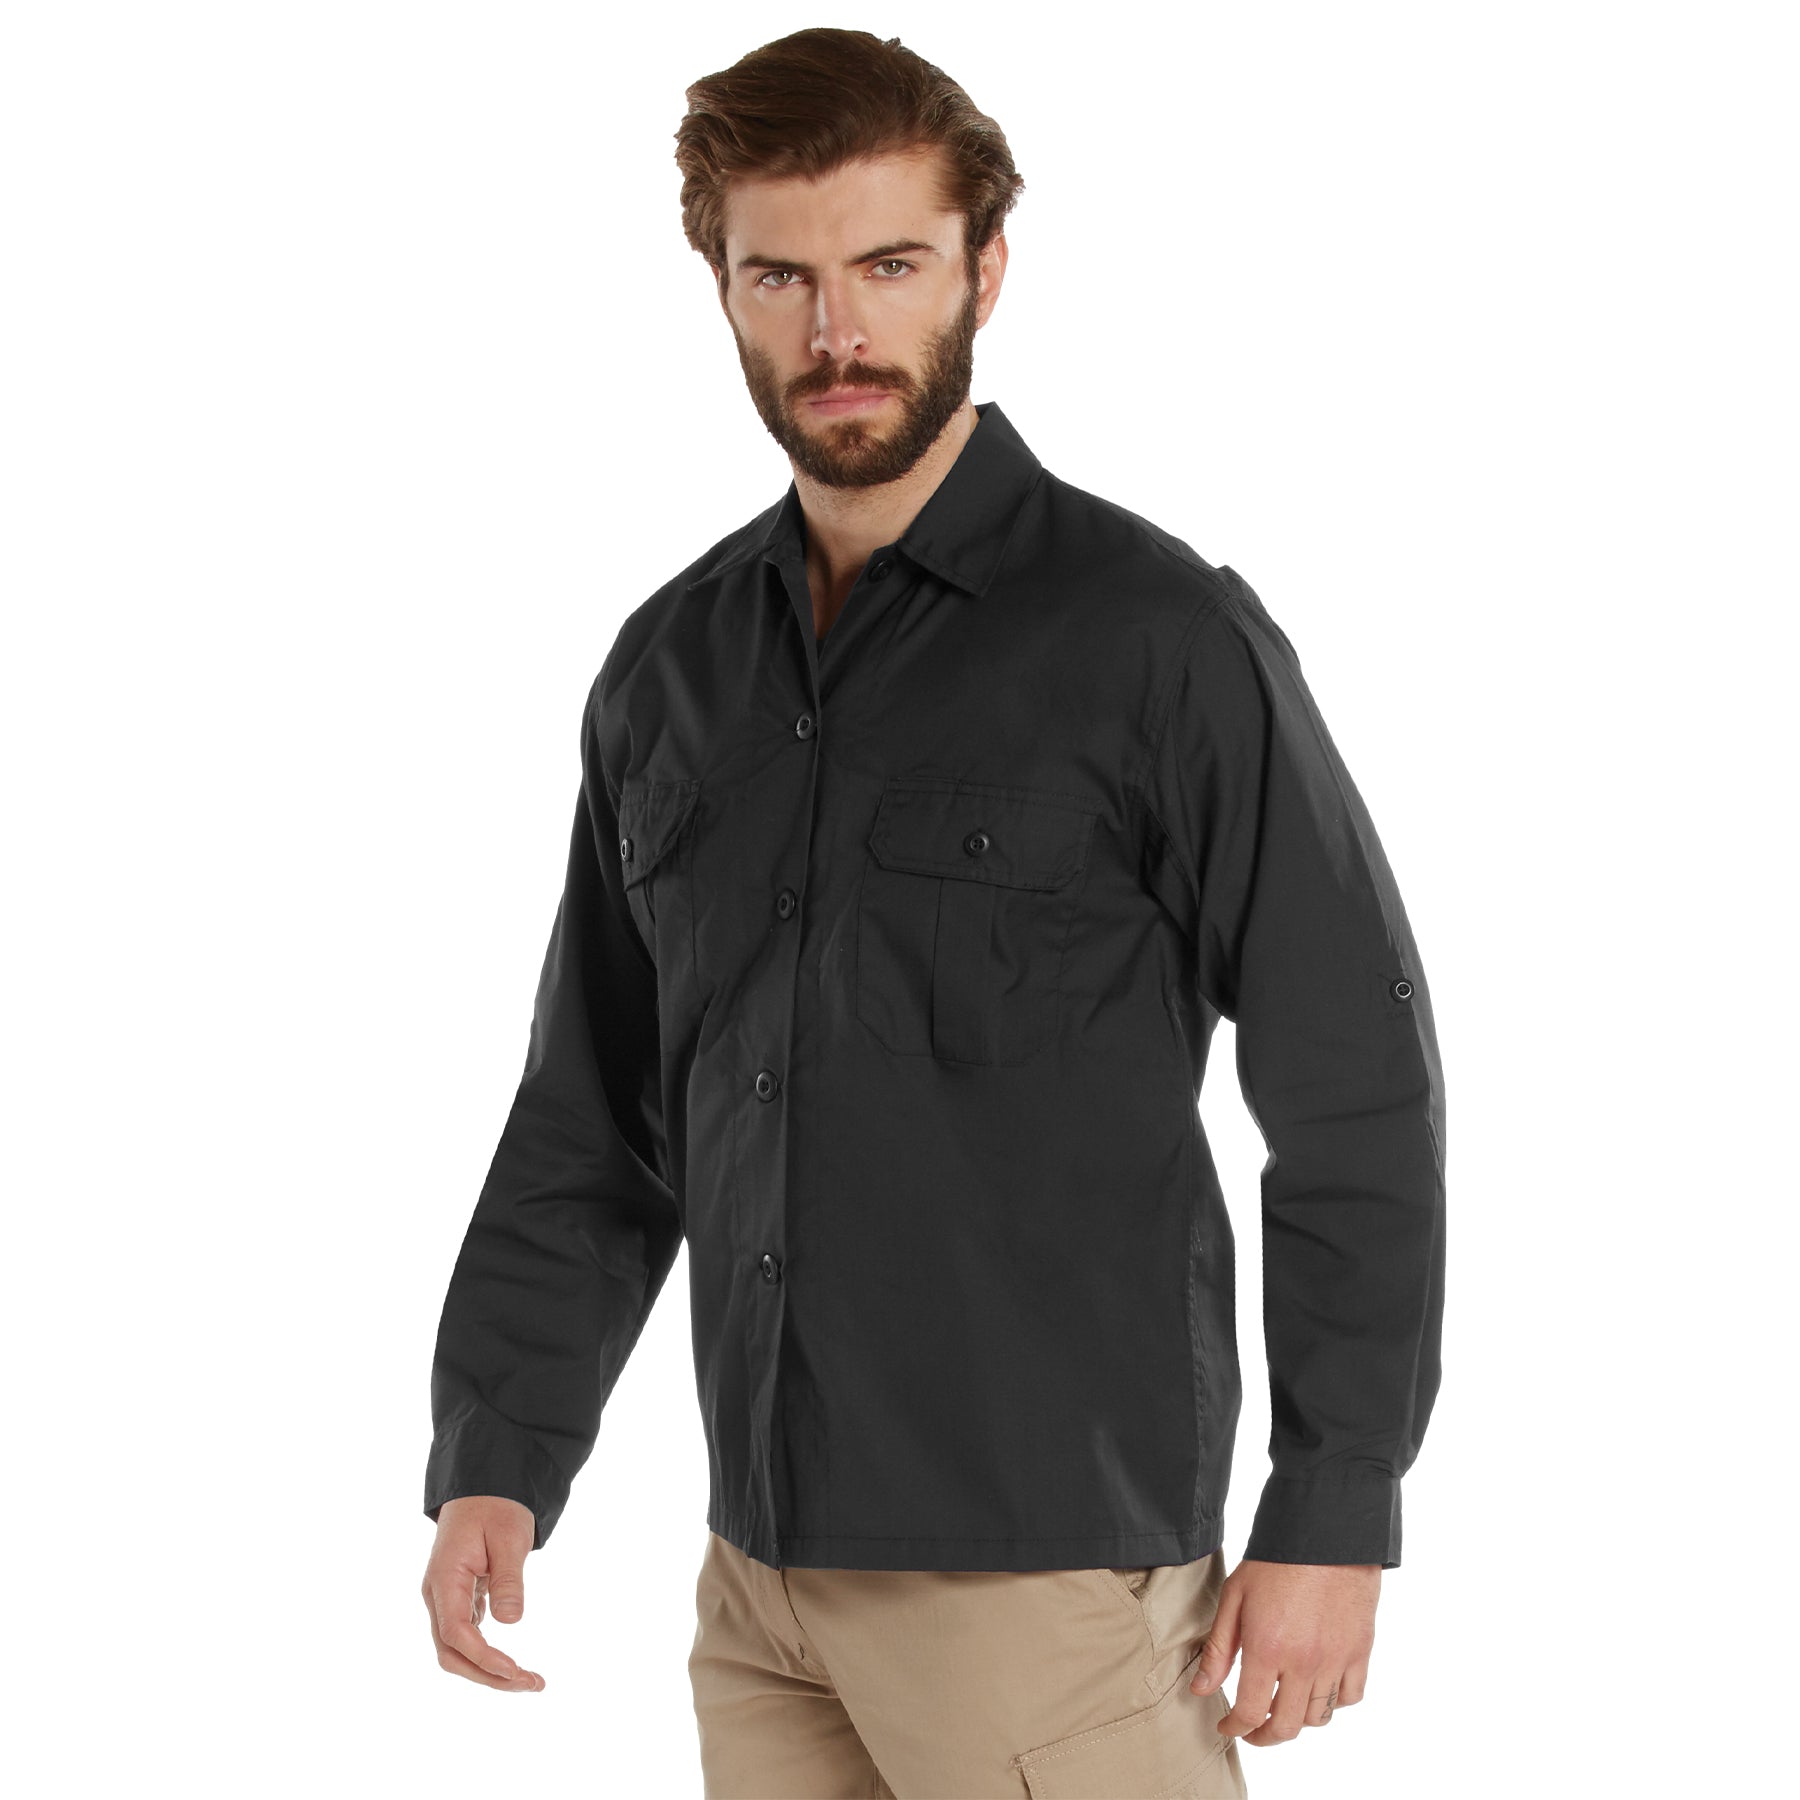 Lightweight Poly/Cotton Rip-Stop Tactical Shirts Black